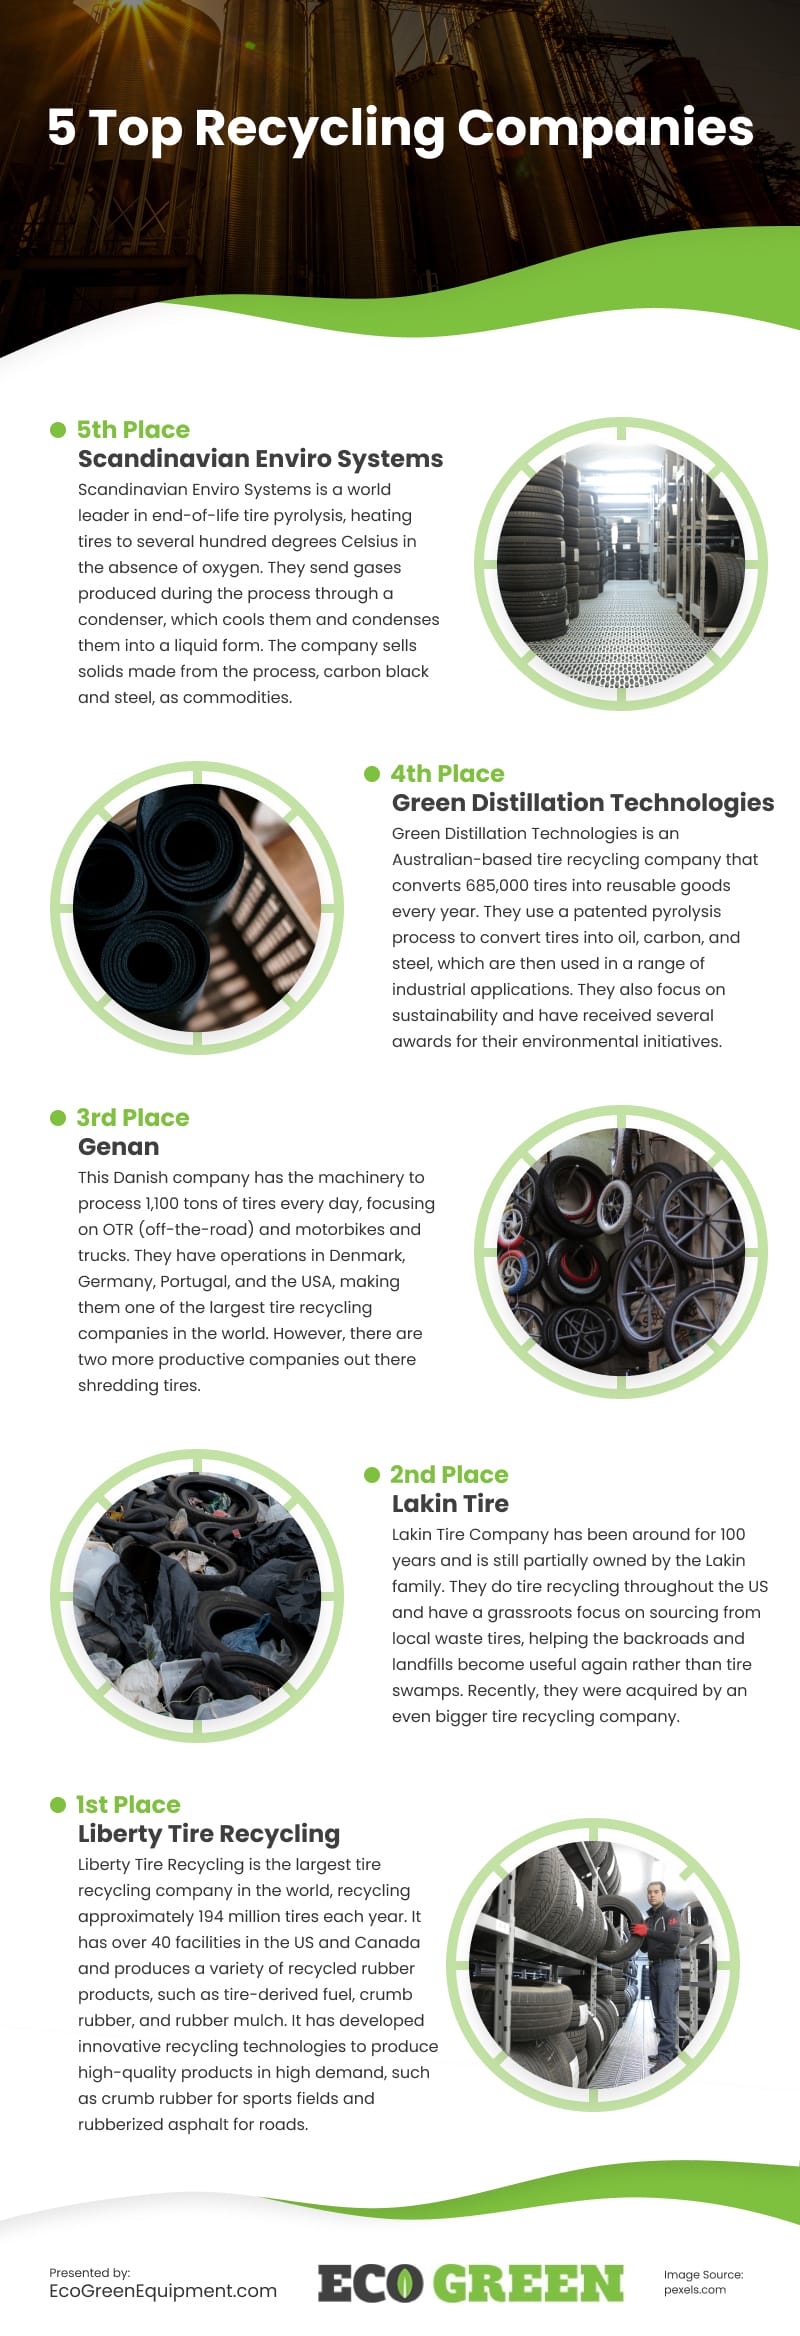 5 Top Recycling Companies Infographic